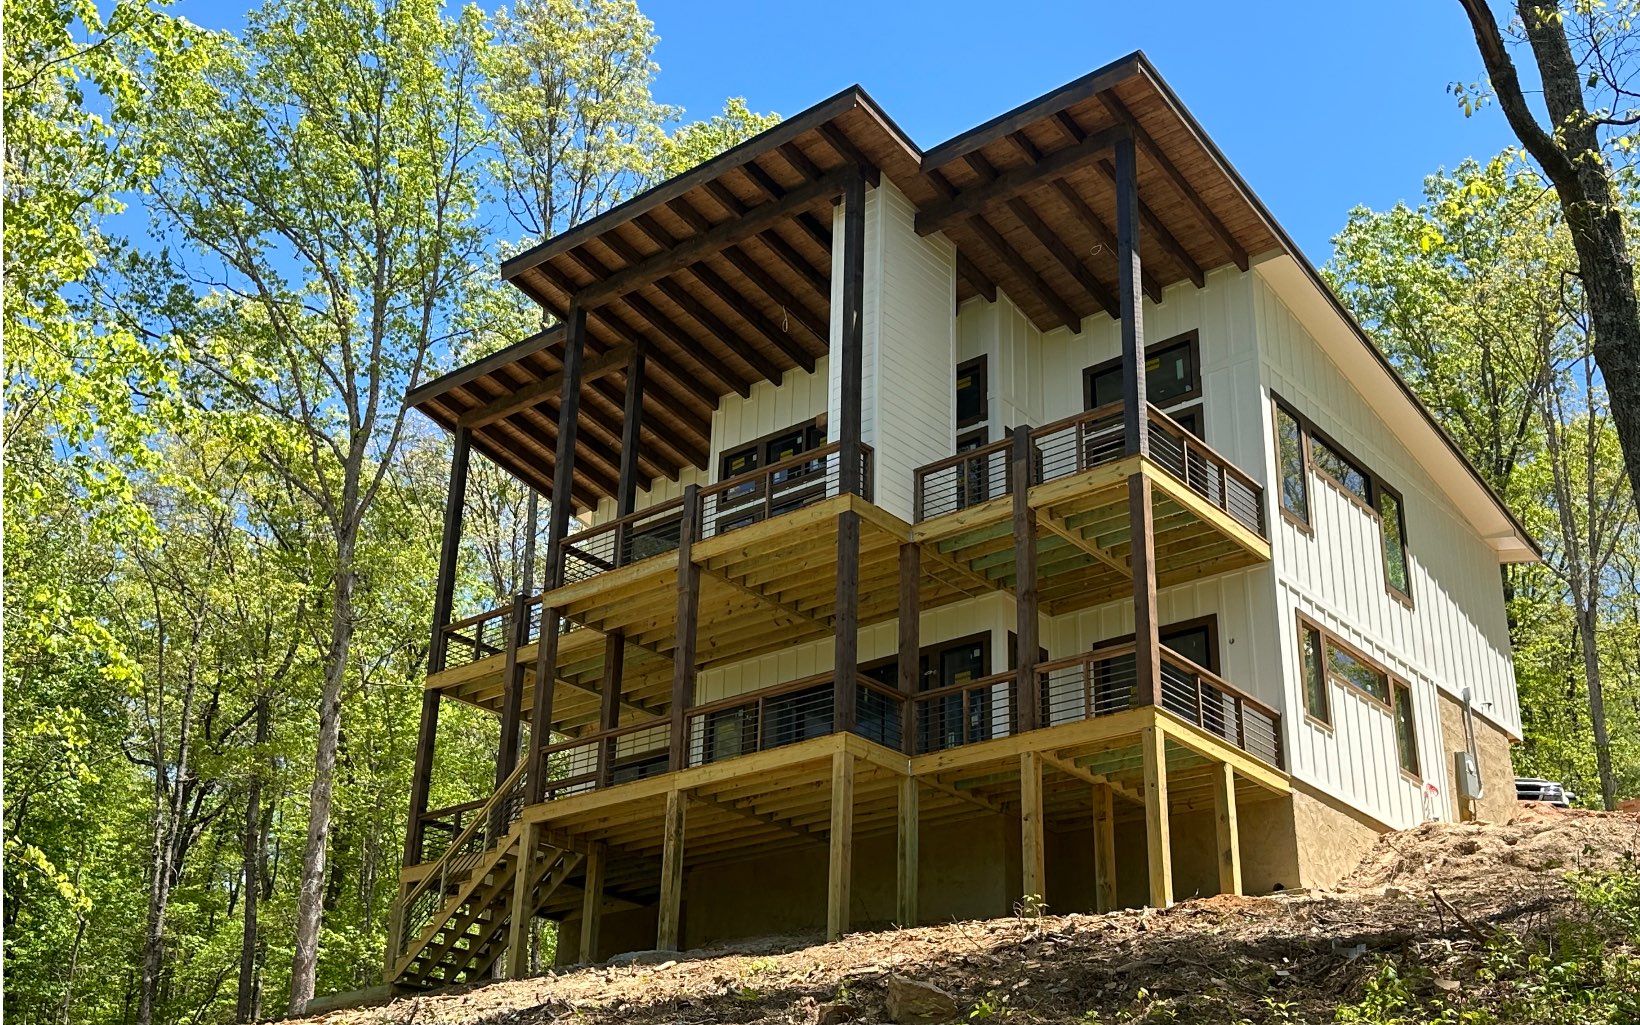 Pre-Construction...Mountain Modern creekfront cabin located within 5 min of Downtown Blue Ridge! Sleek, Bold accents meeting modern rustic design creates the ultimate cabin for the most discerning buyer! Open great room w windows galore, soaring ceilings, lavish stone fireplace, massive wood beam accents & the best in lighting & finishes! Combination of wood, stone & drywall add just the right amount of texture! The main level boasts 2 master bedrooms, a butler's pantry, tile walk-in shower & great closet space. Main level deck will feel like part of the living space as the two combine giving it the most adequate entertainment area alongside the outdoor fireplace. The terrace level features stained concrete flooring, wet bar, rec/bonus area as well as 2 more bedrooms & baths. Again, the outdoors will be incorporated in to the space allowing you the ability to enjoy your useable creekfront acreage! POWERLINES TO BE REMOVED so there's nothing blocking your view of the creek or invading your space. Easy access, private lot, SHORT TERM RENTALS ARE ALLOWED & HIGH SPEED INTERNET AVAILABLE! Completion date projected for July 31, 2023.